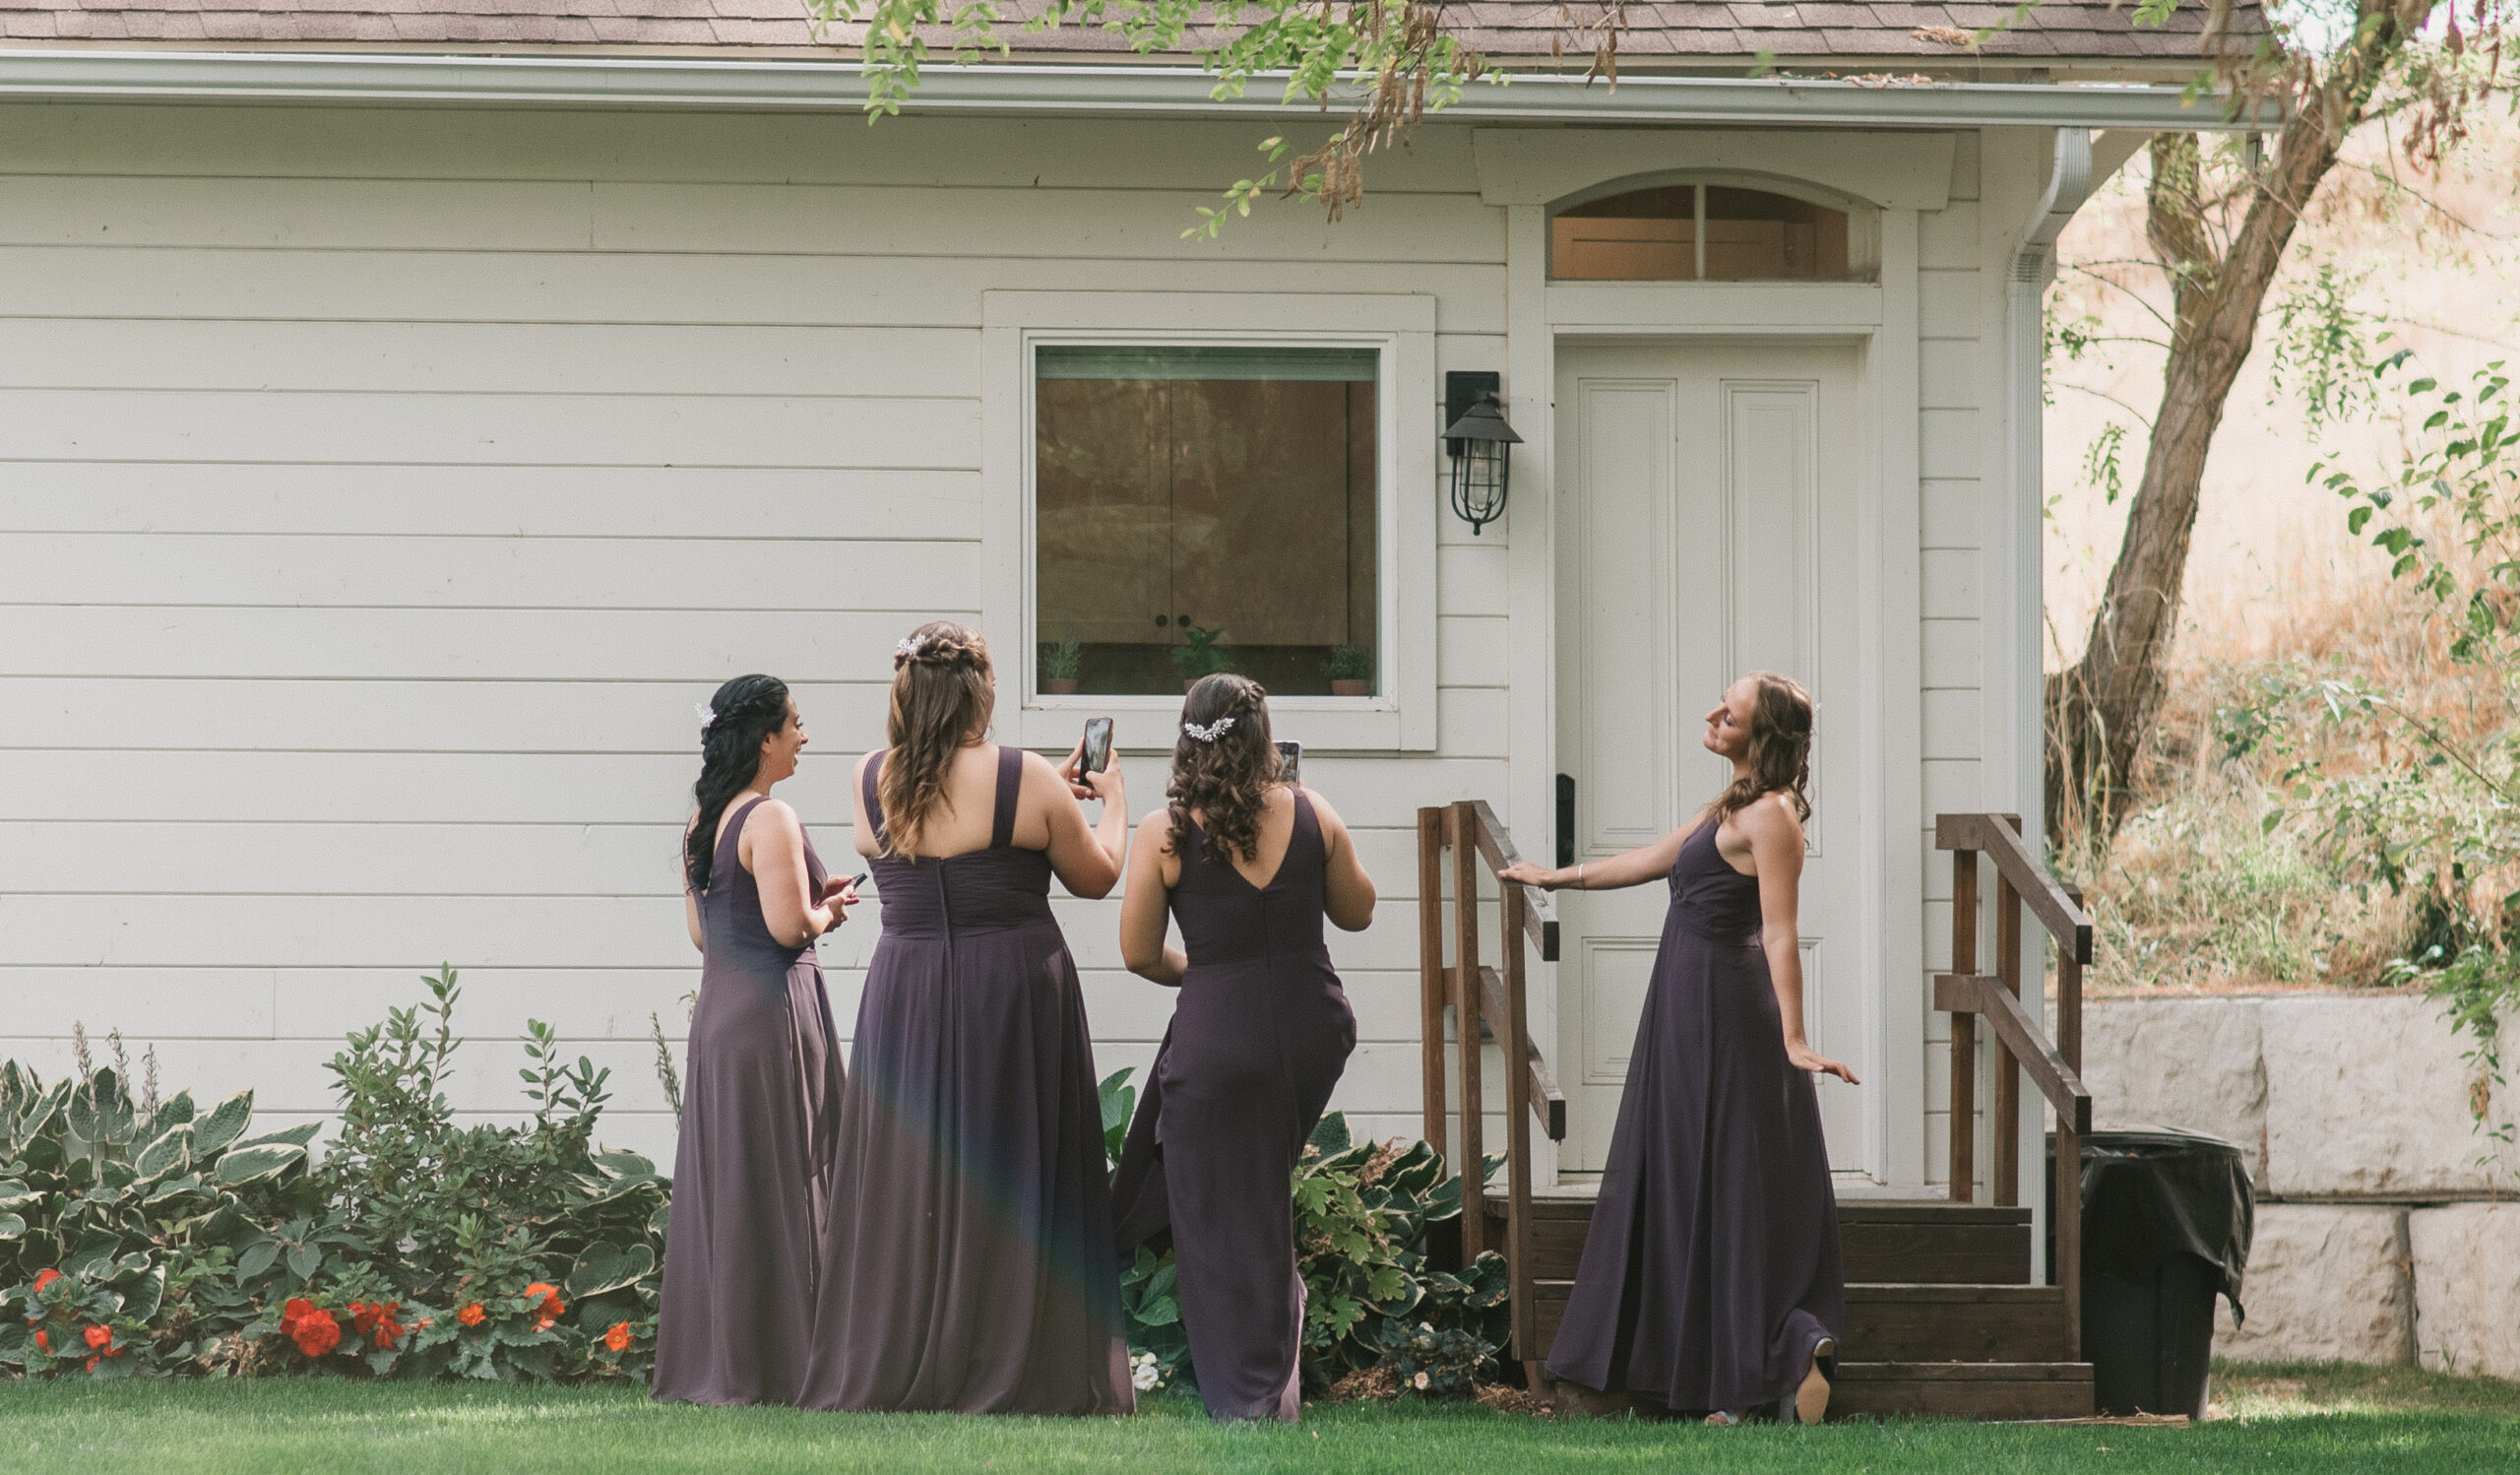 candid wedding photography of bridesmaids taking pictures